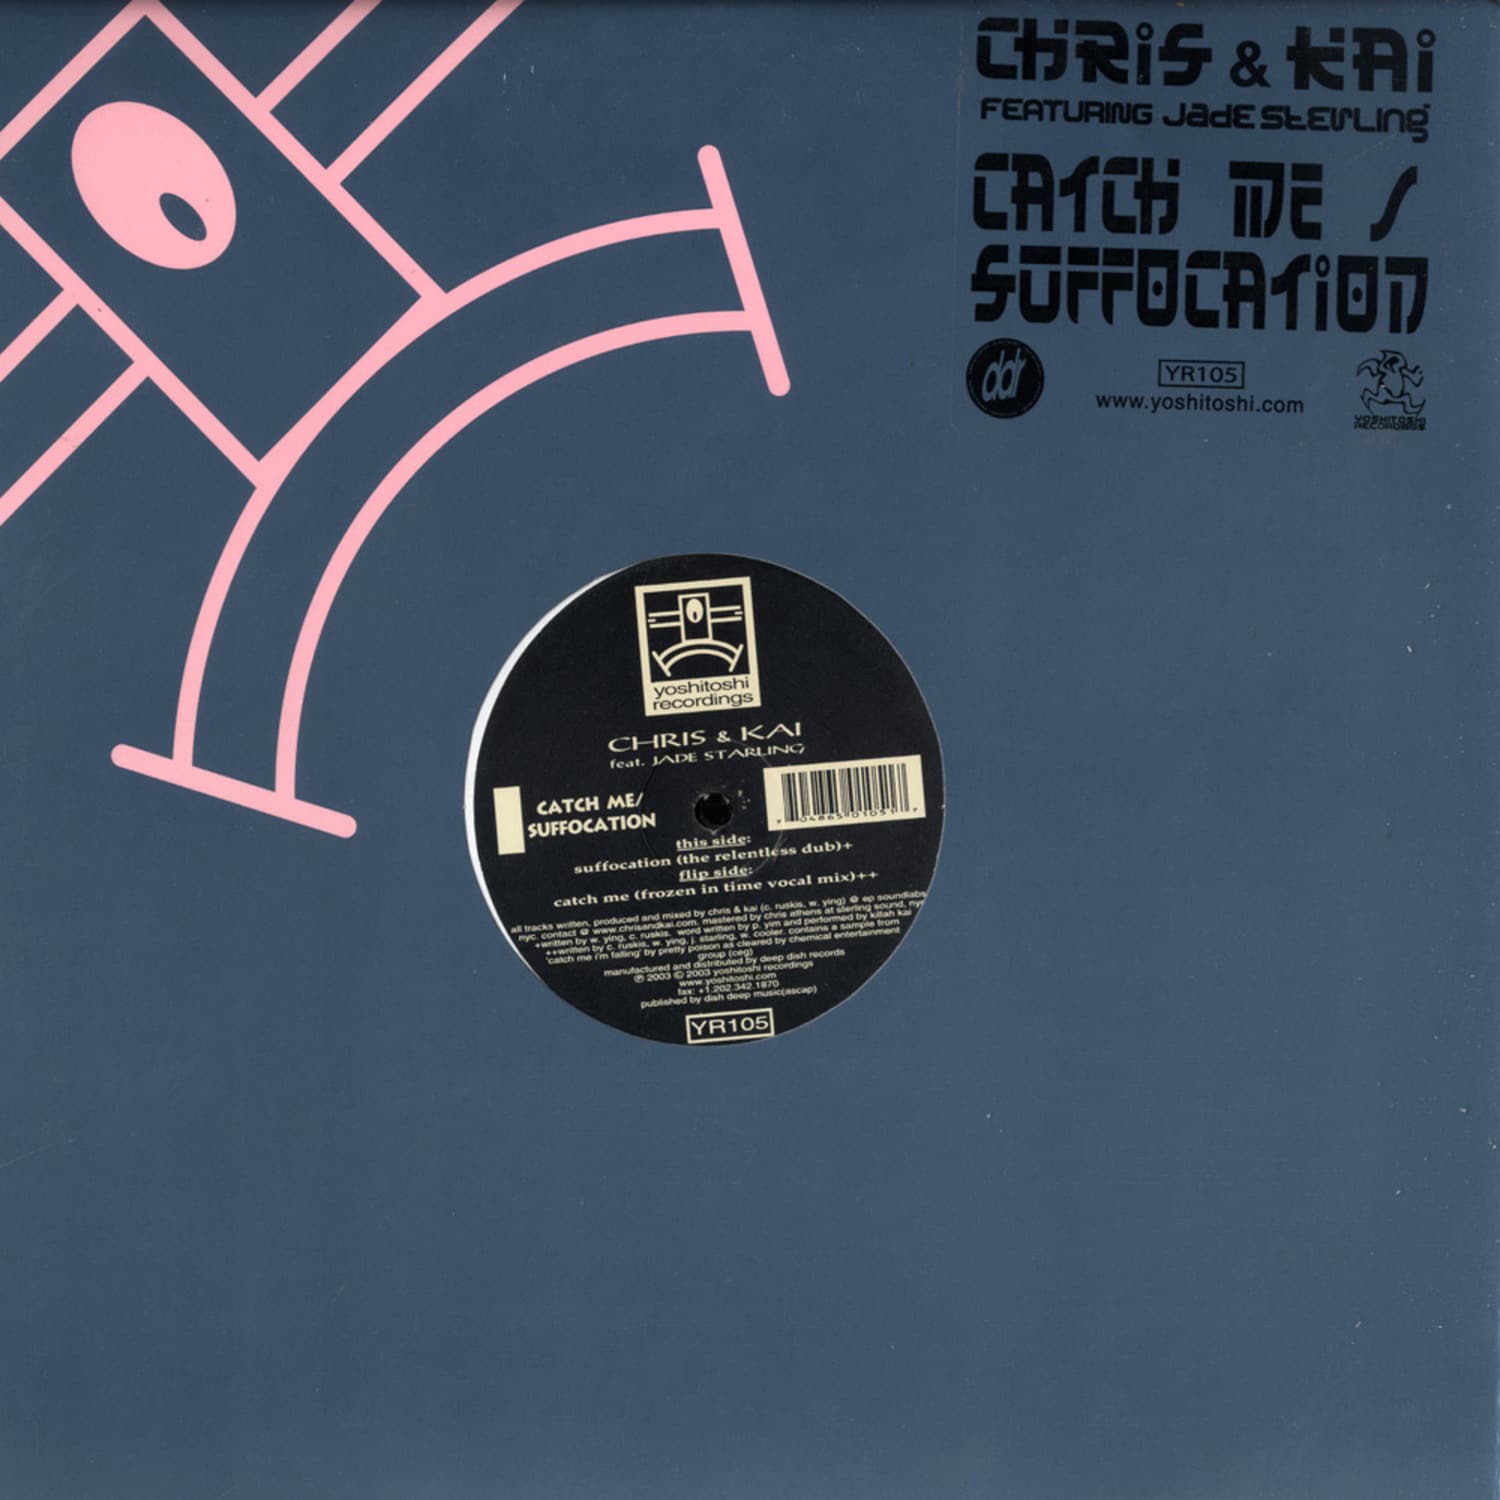 Chris & Kai ft Jade Sterling - CATCH ME / SUFFOCATION 